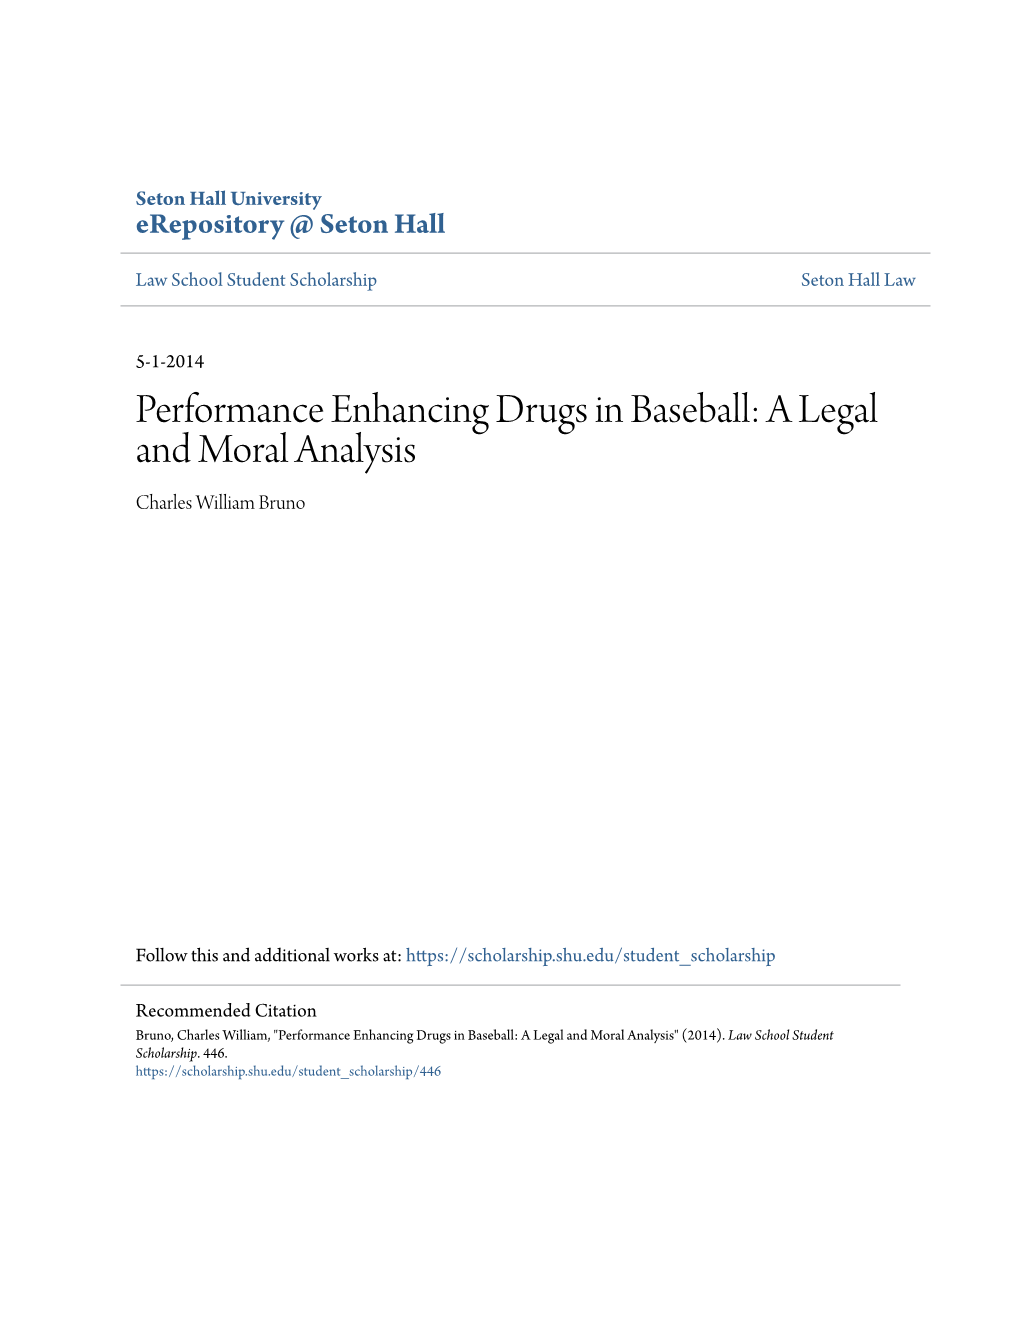 Performance Enhancing Drugs in Baseball: a Legal and Moral Analysis Charles William Bruno